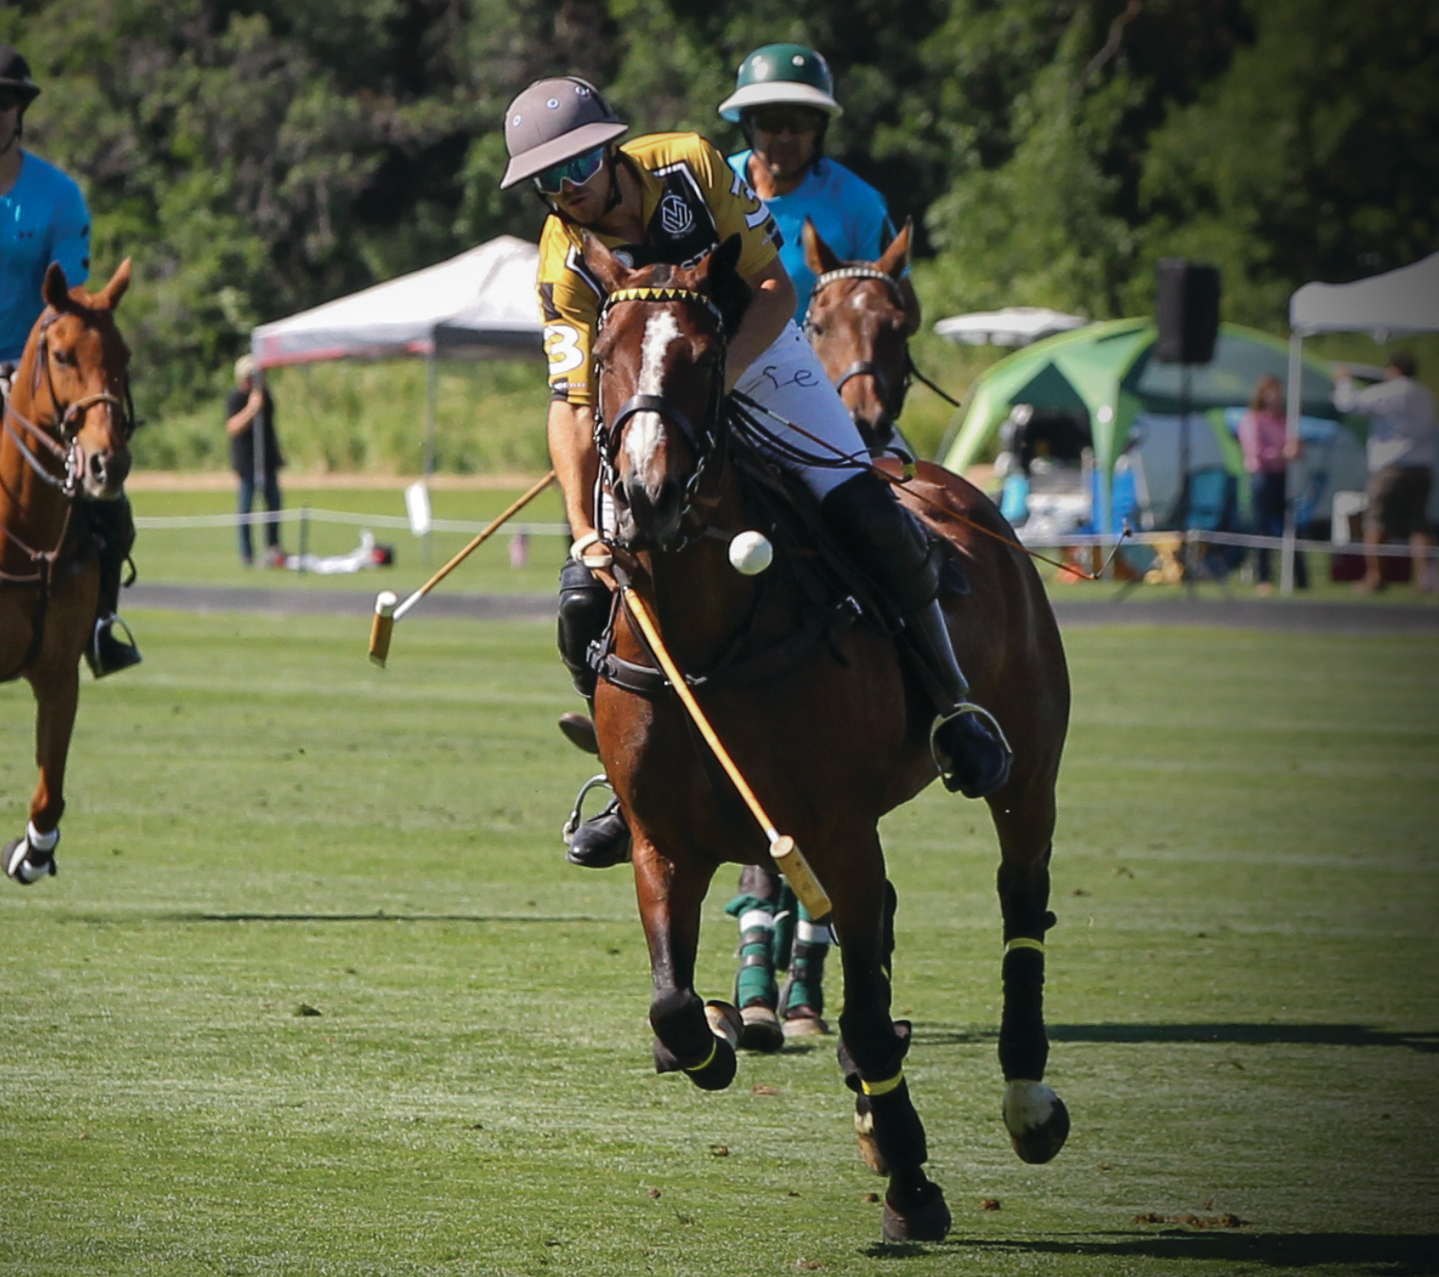 A man riding a horse playing polo on a field